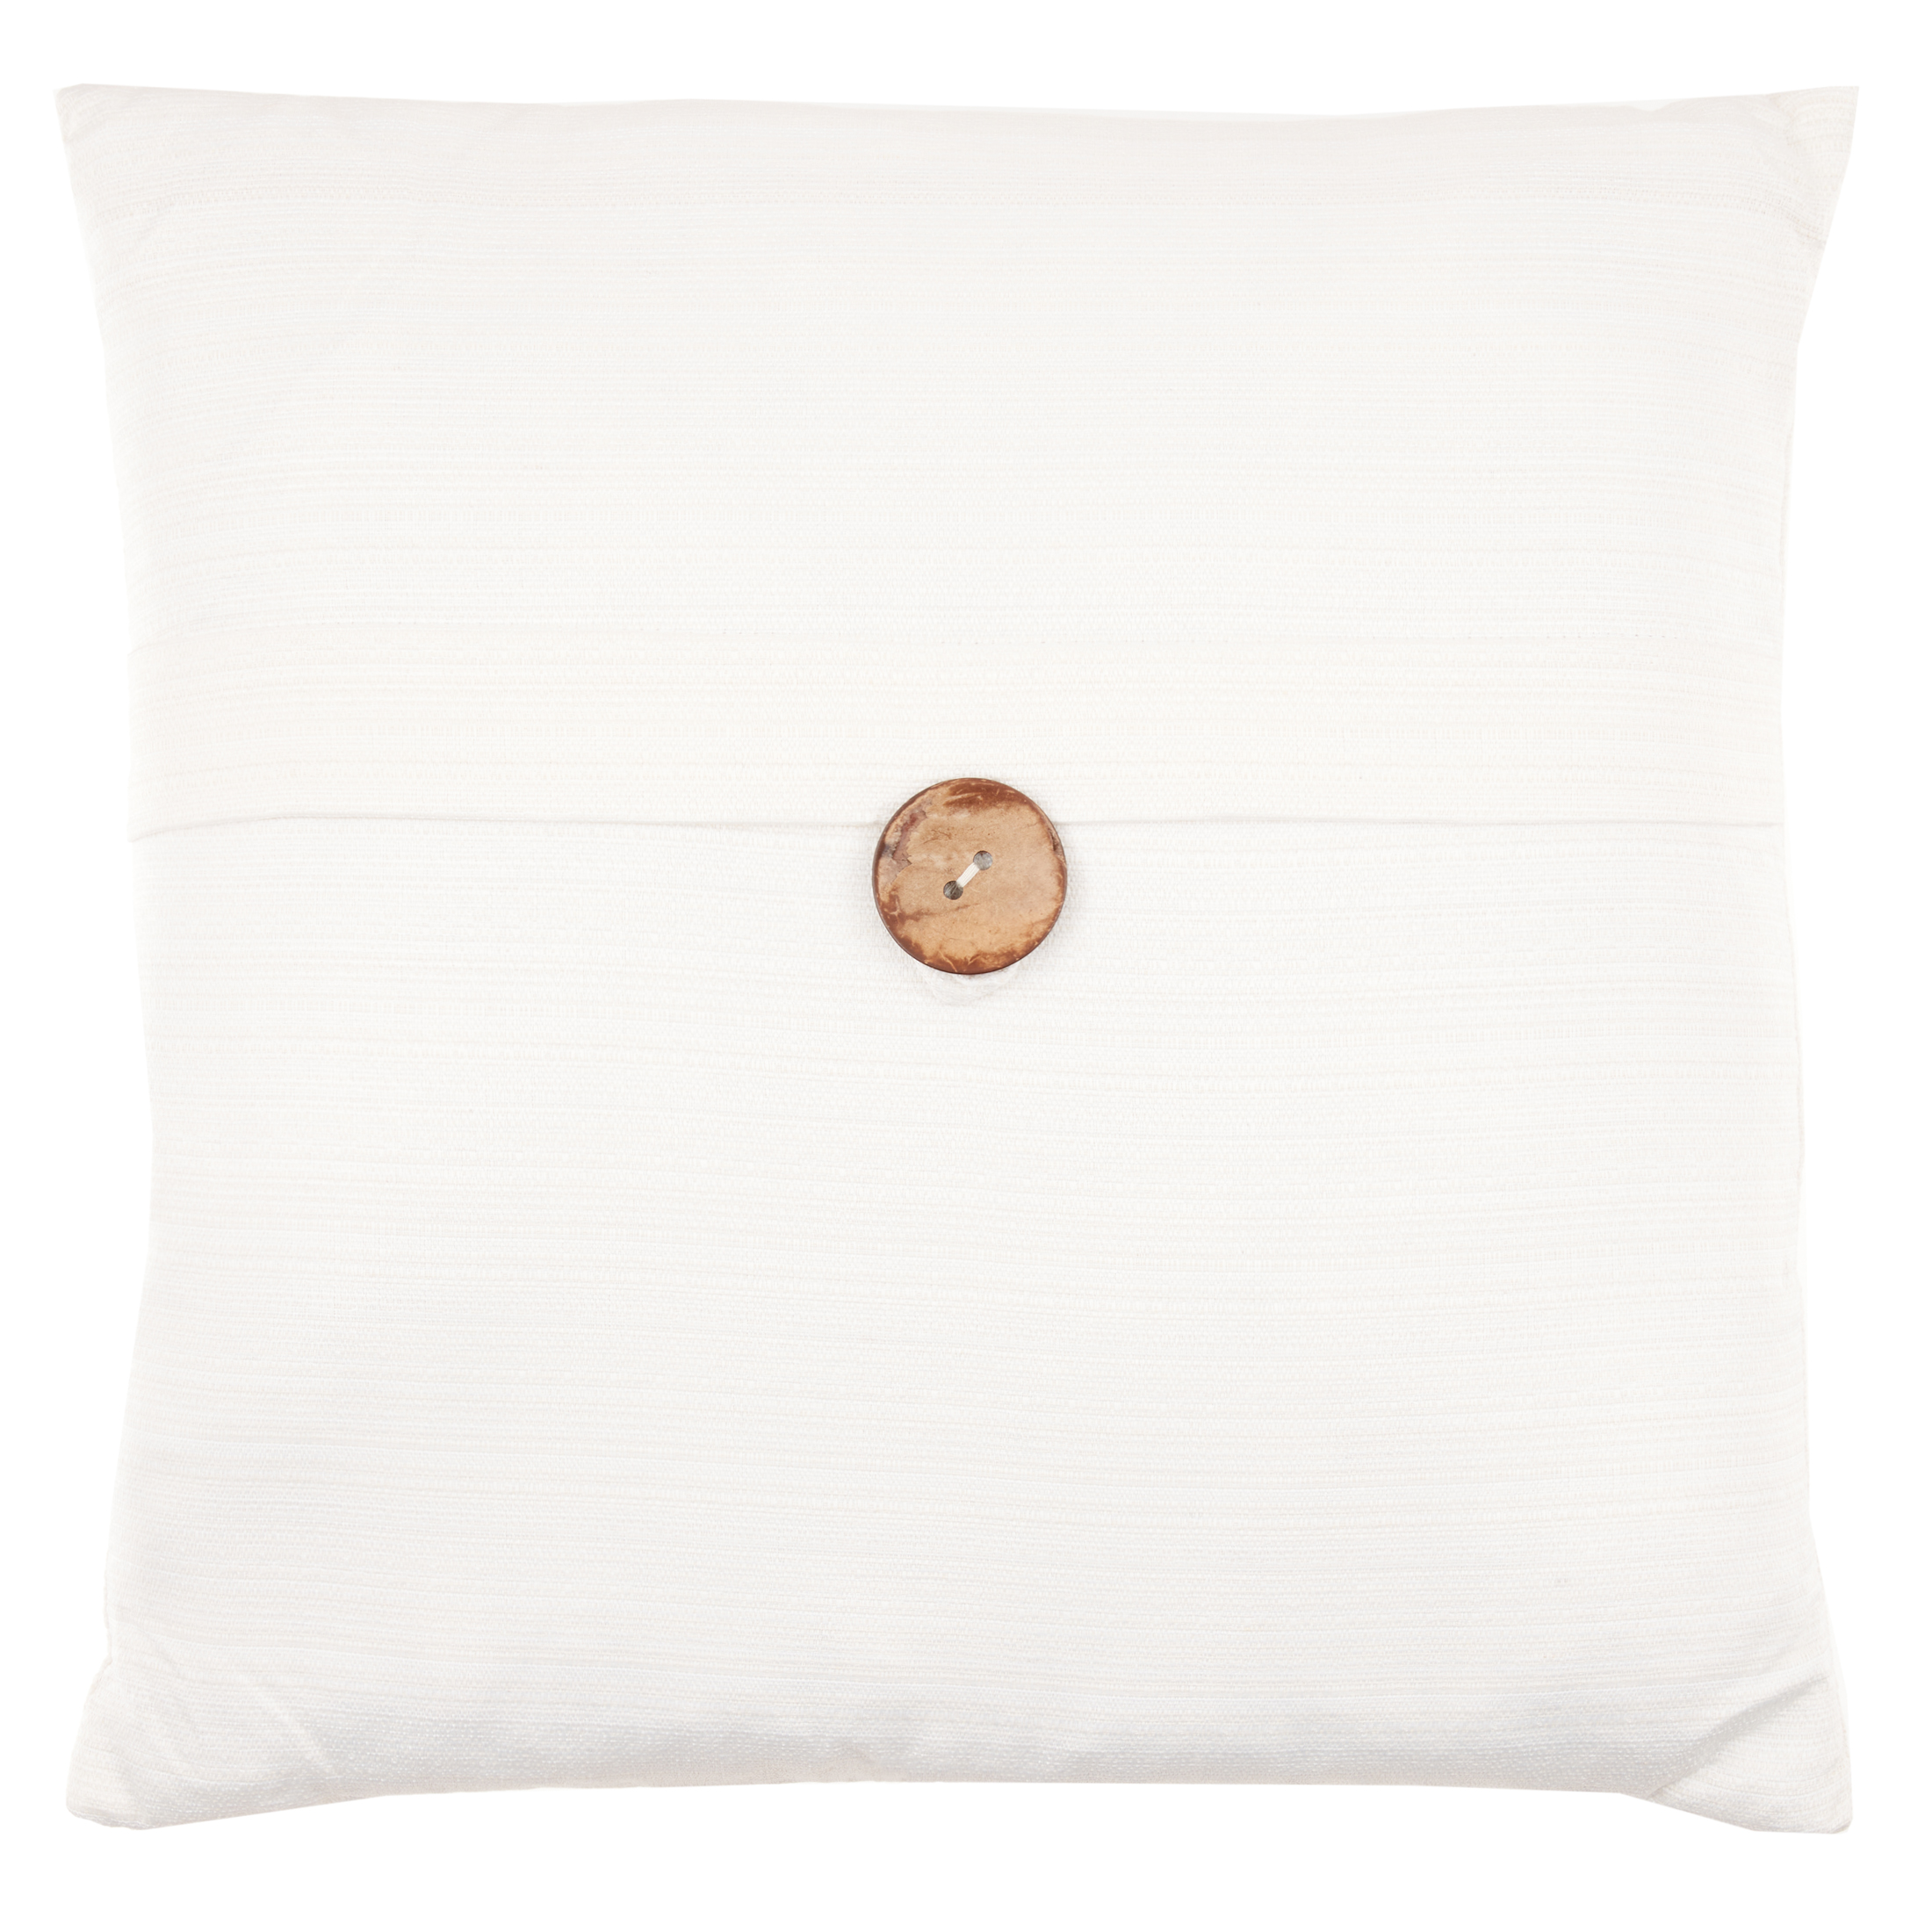 Better Homes & Gardens Feather Filled Banded Button Decorative Throw Pillow, 20" x 20", White, 2 Pack - image 2 of 7